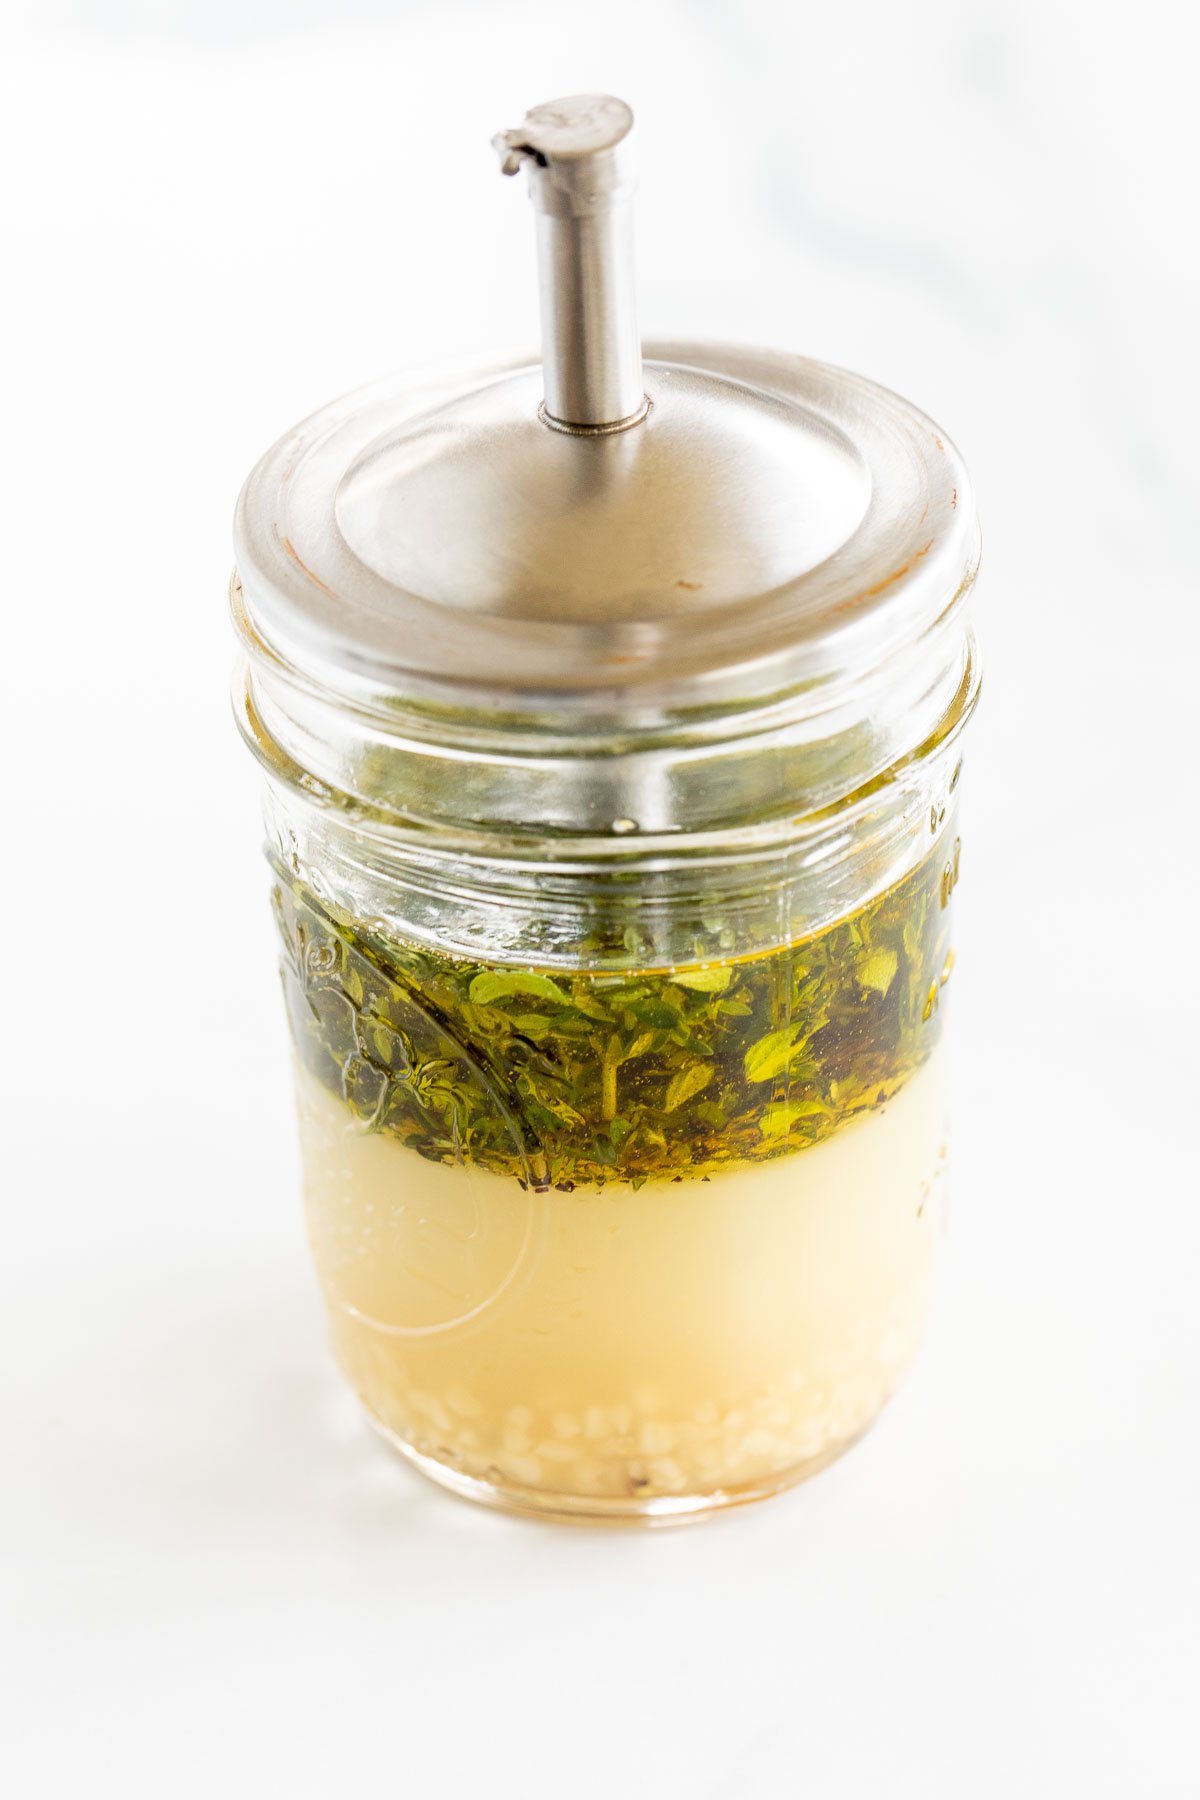 Greek chicken marinade in a glass jar with a silver lid.